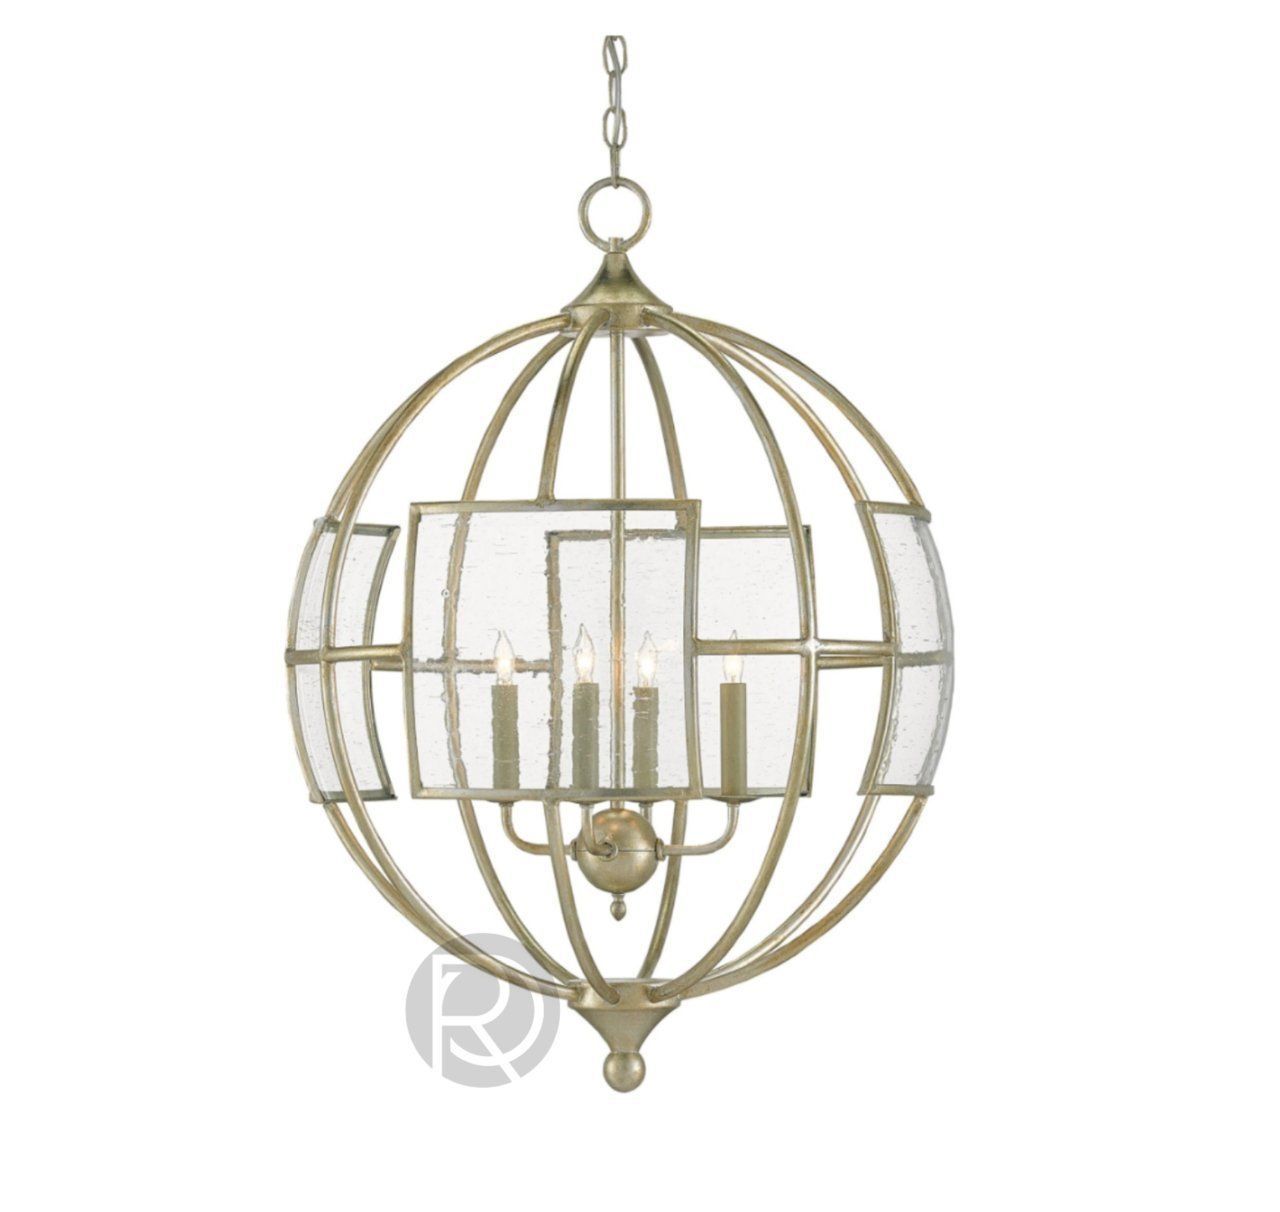 BROXTON SILVER ORB chandelier by Currey & Company